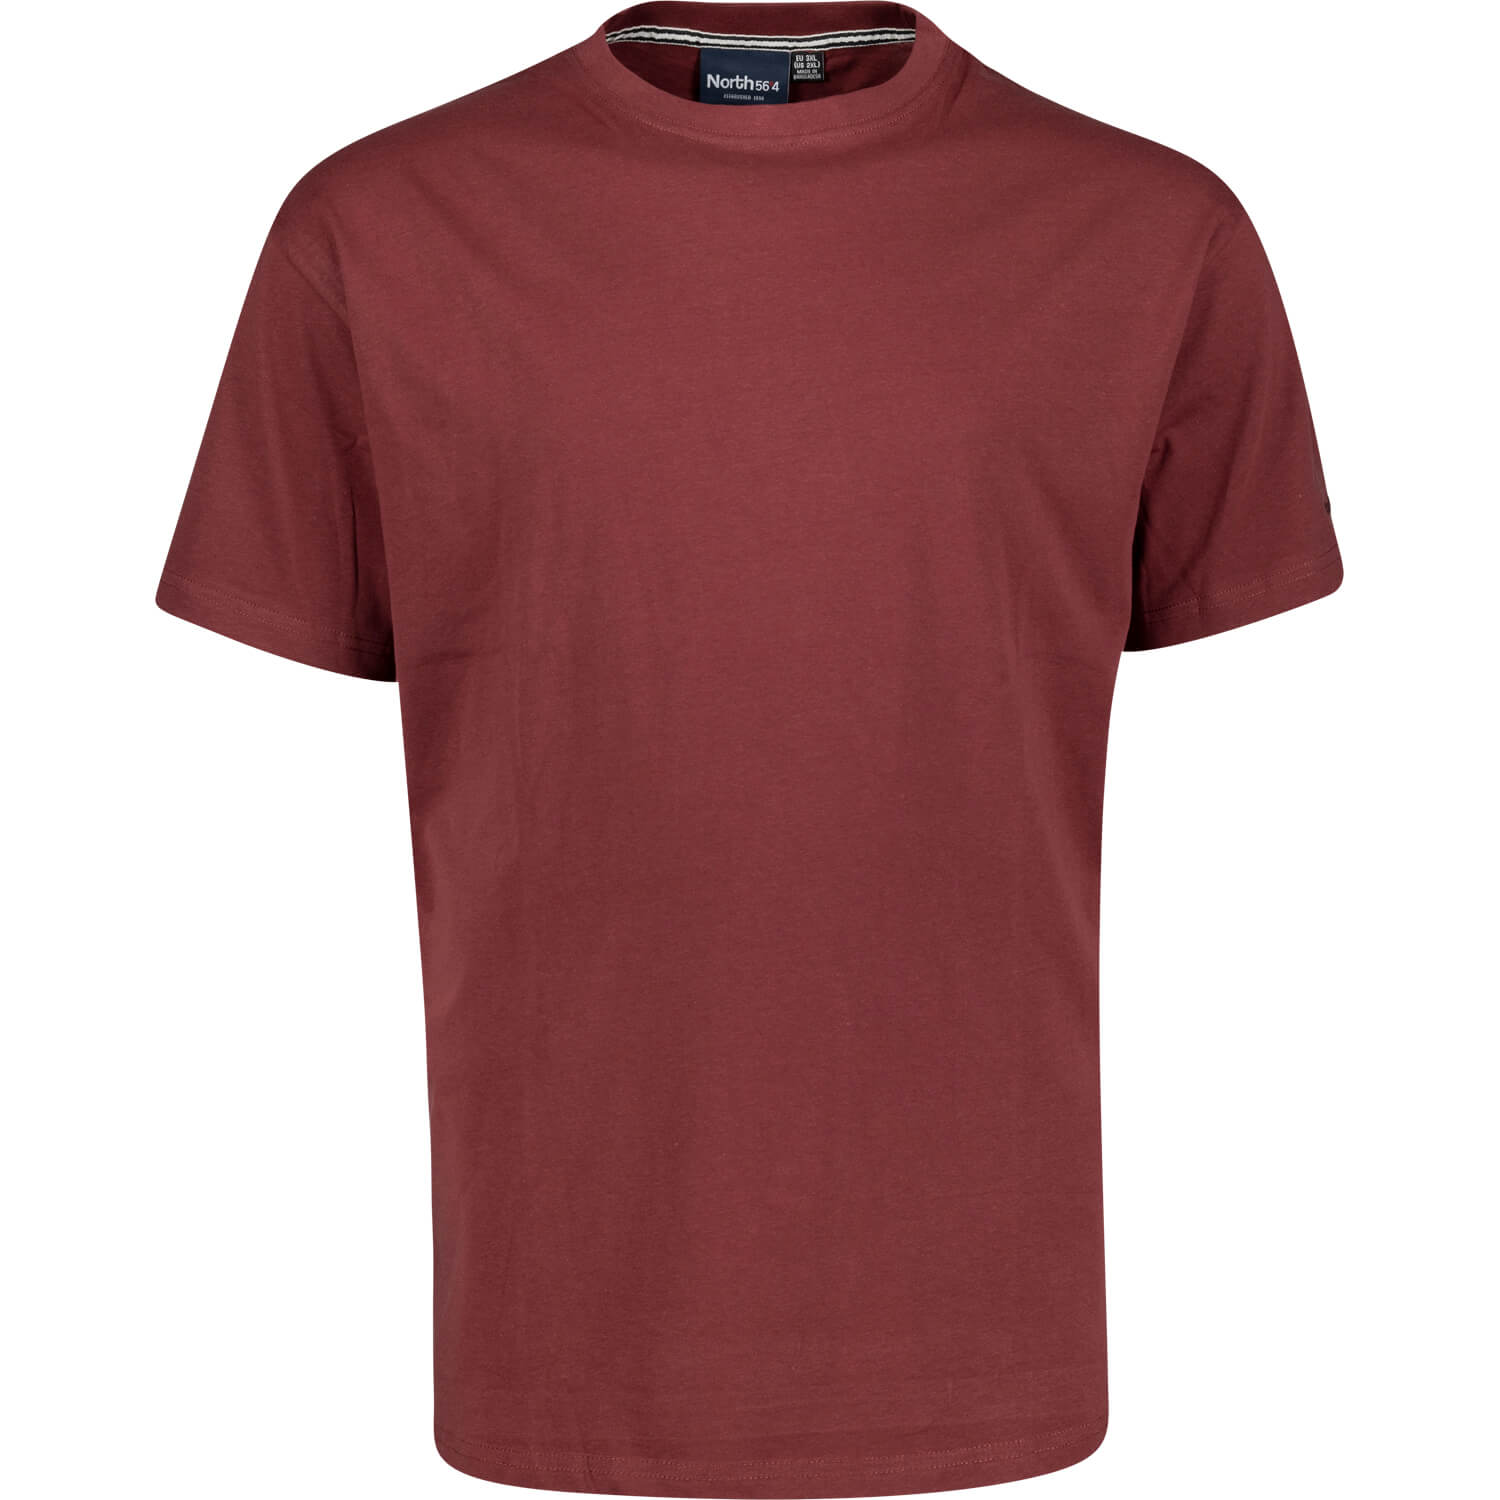 Basic t-shirt in bordeaux by North 56°4 in extra large sizes until 8XL